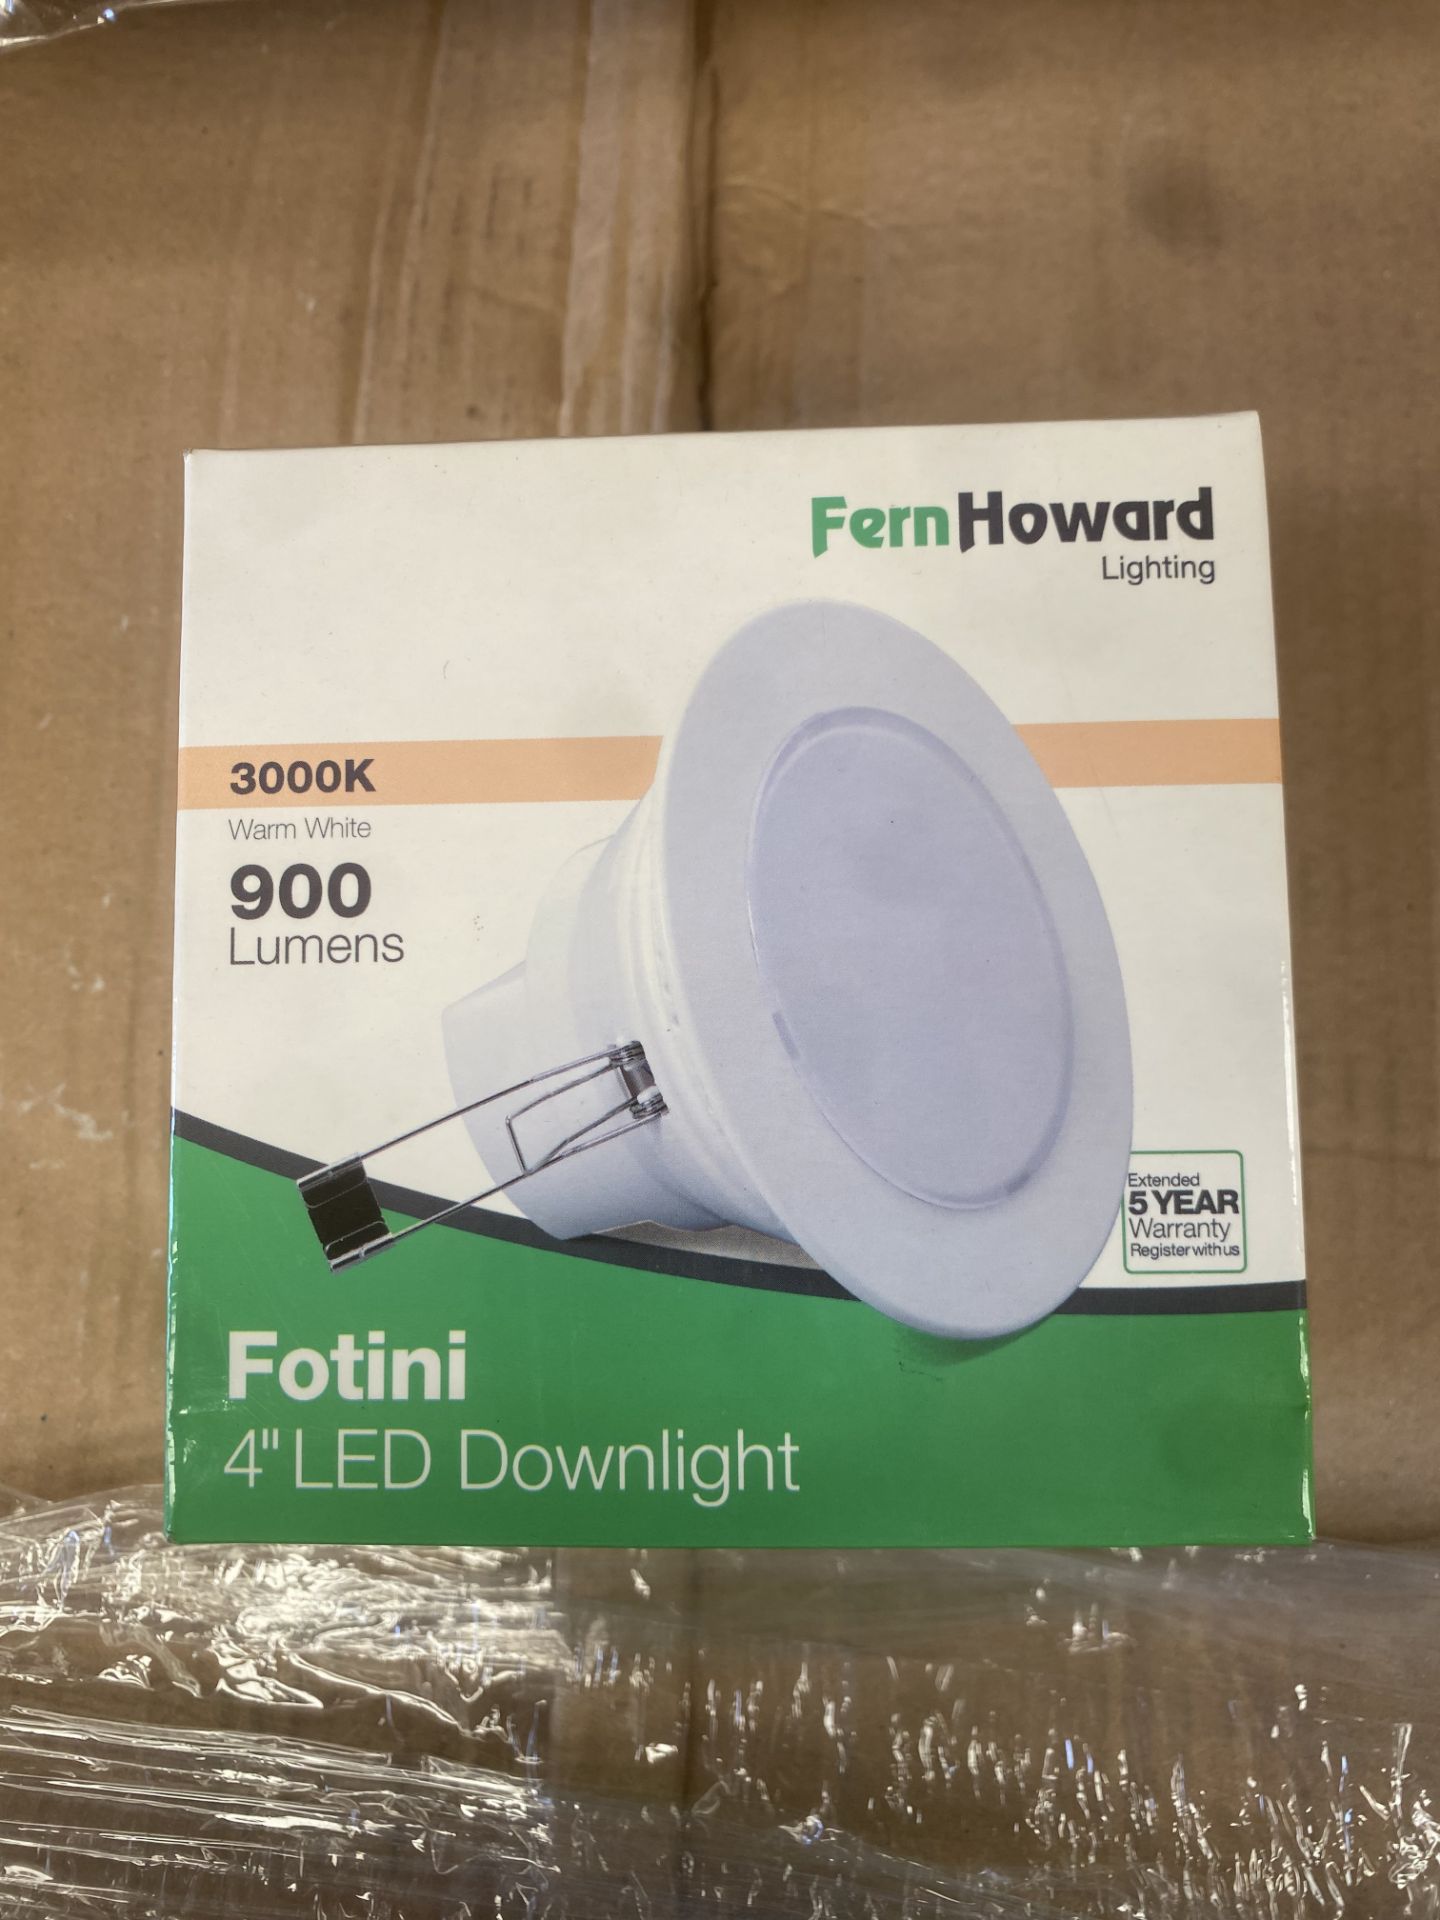 48 X 4 INCH LED DOWNLIGHT 3000K TRADE VALUE £590 - Image 2 of 4